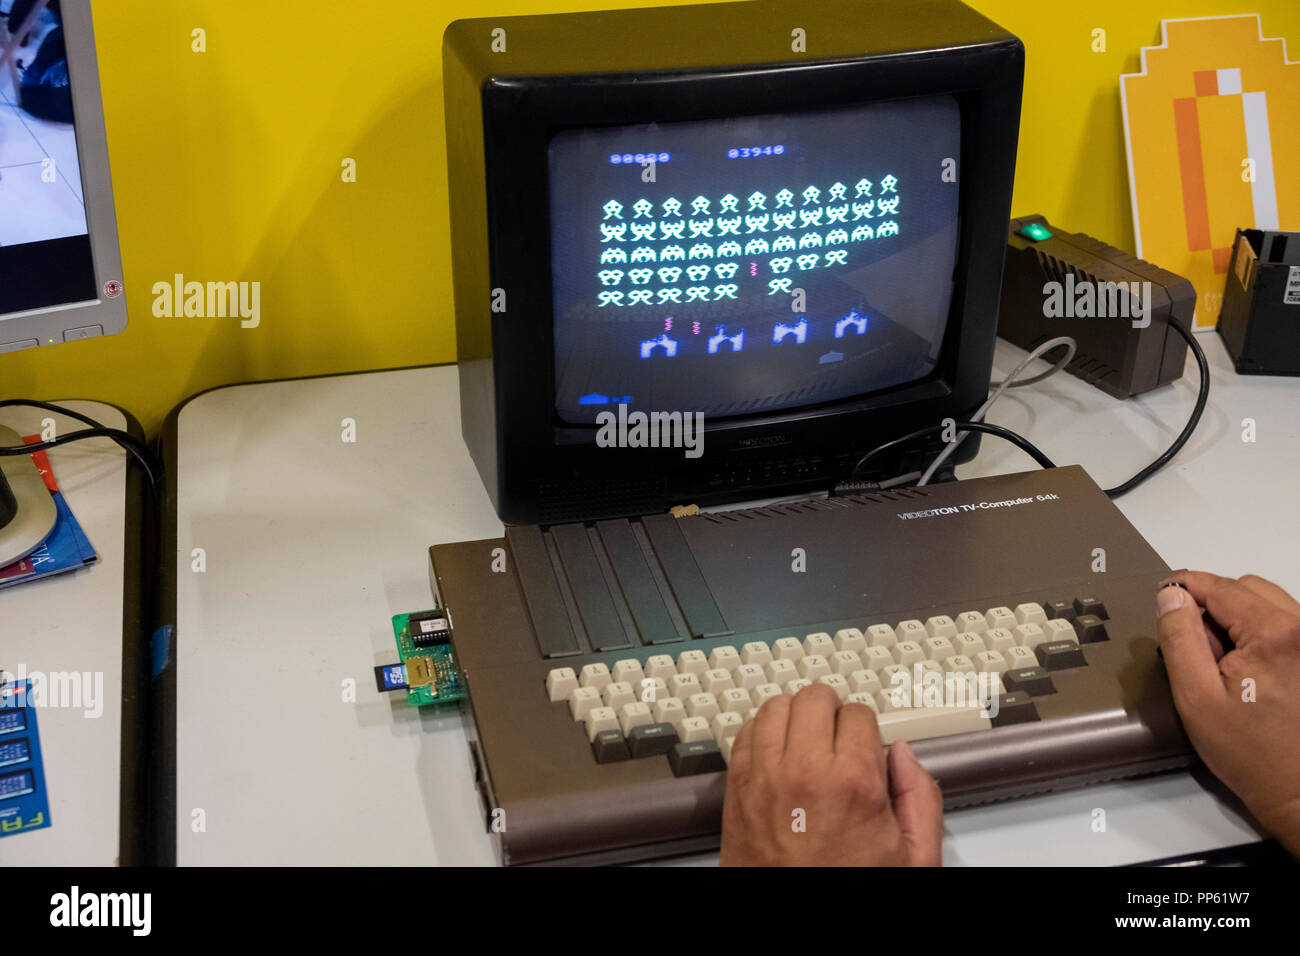 old Videoton TV-Computer 64k with Space Invaders game personal computer at the world's largest trade fair for computer and video games Gamescom in Cologne, Germany on 24.8.2018 Stock Photo